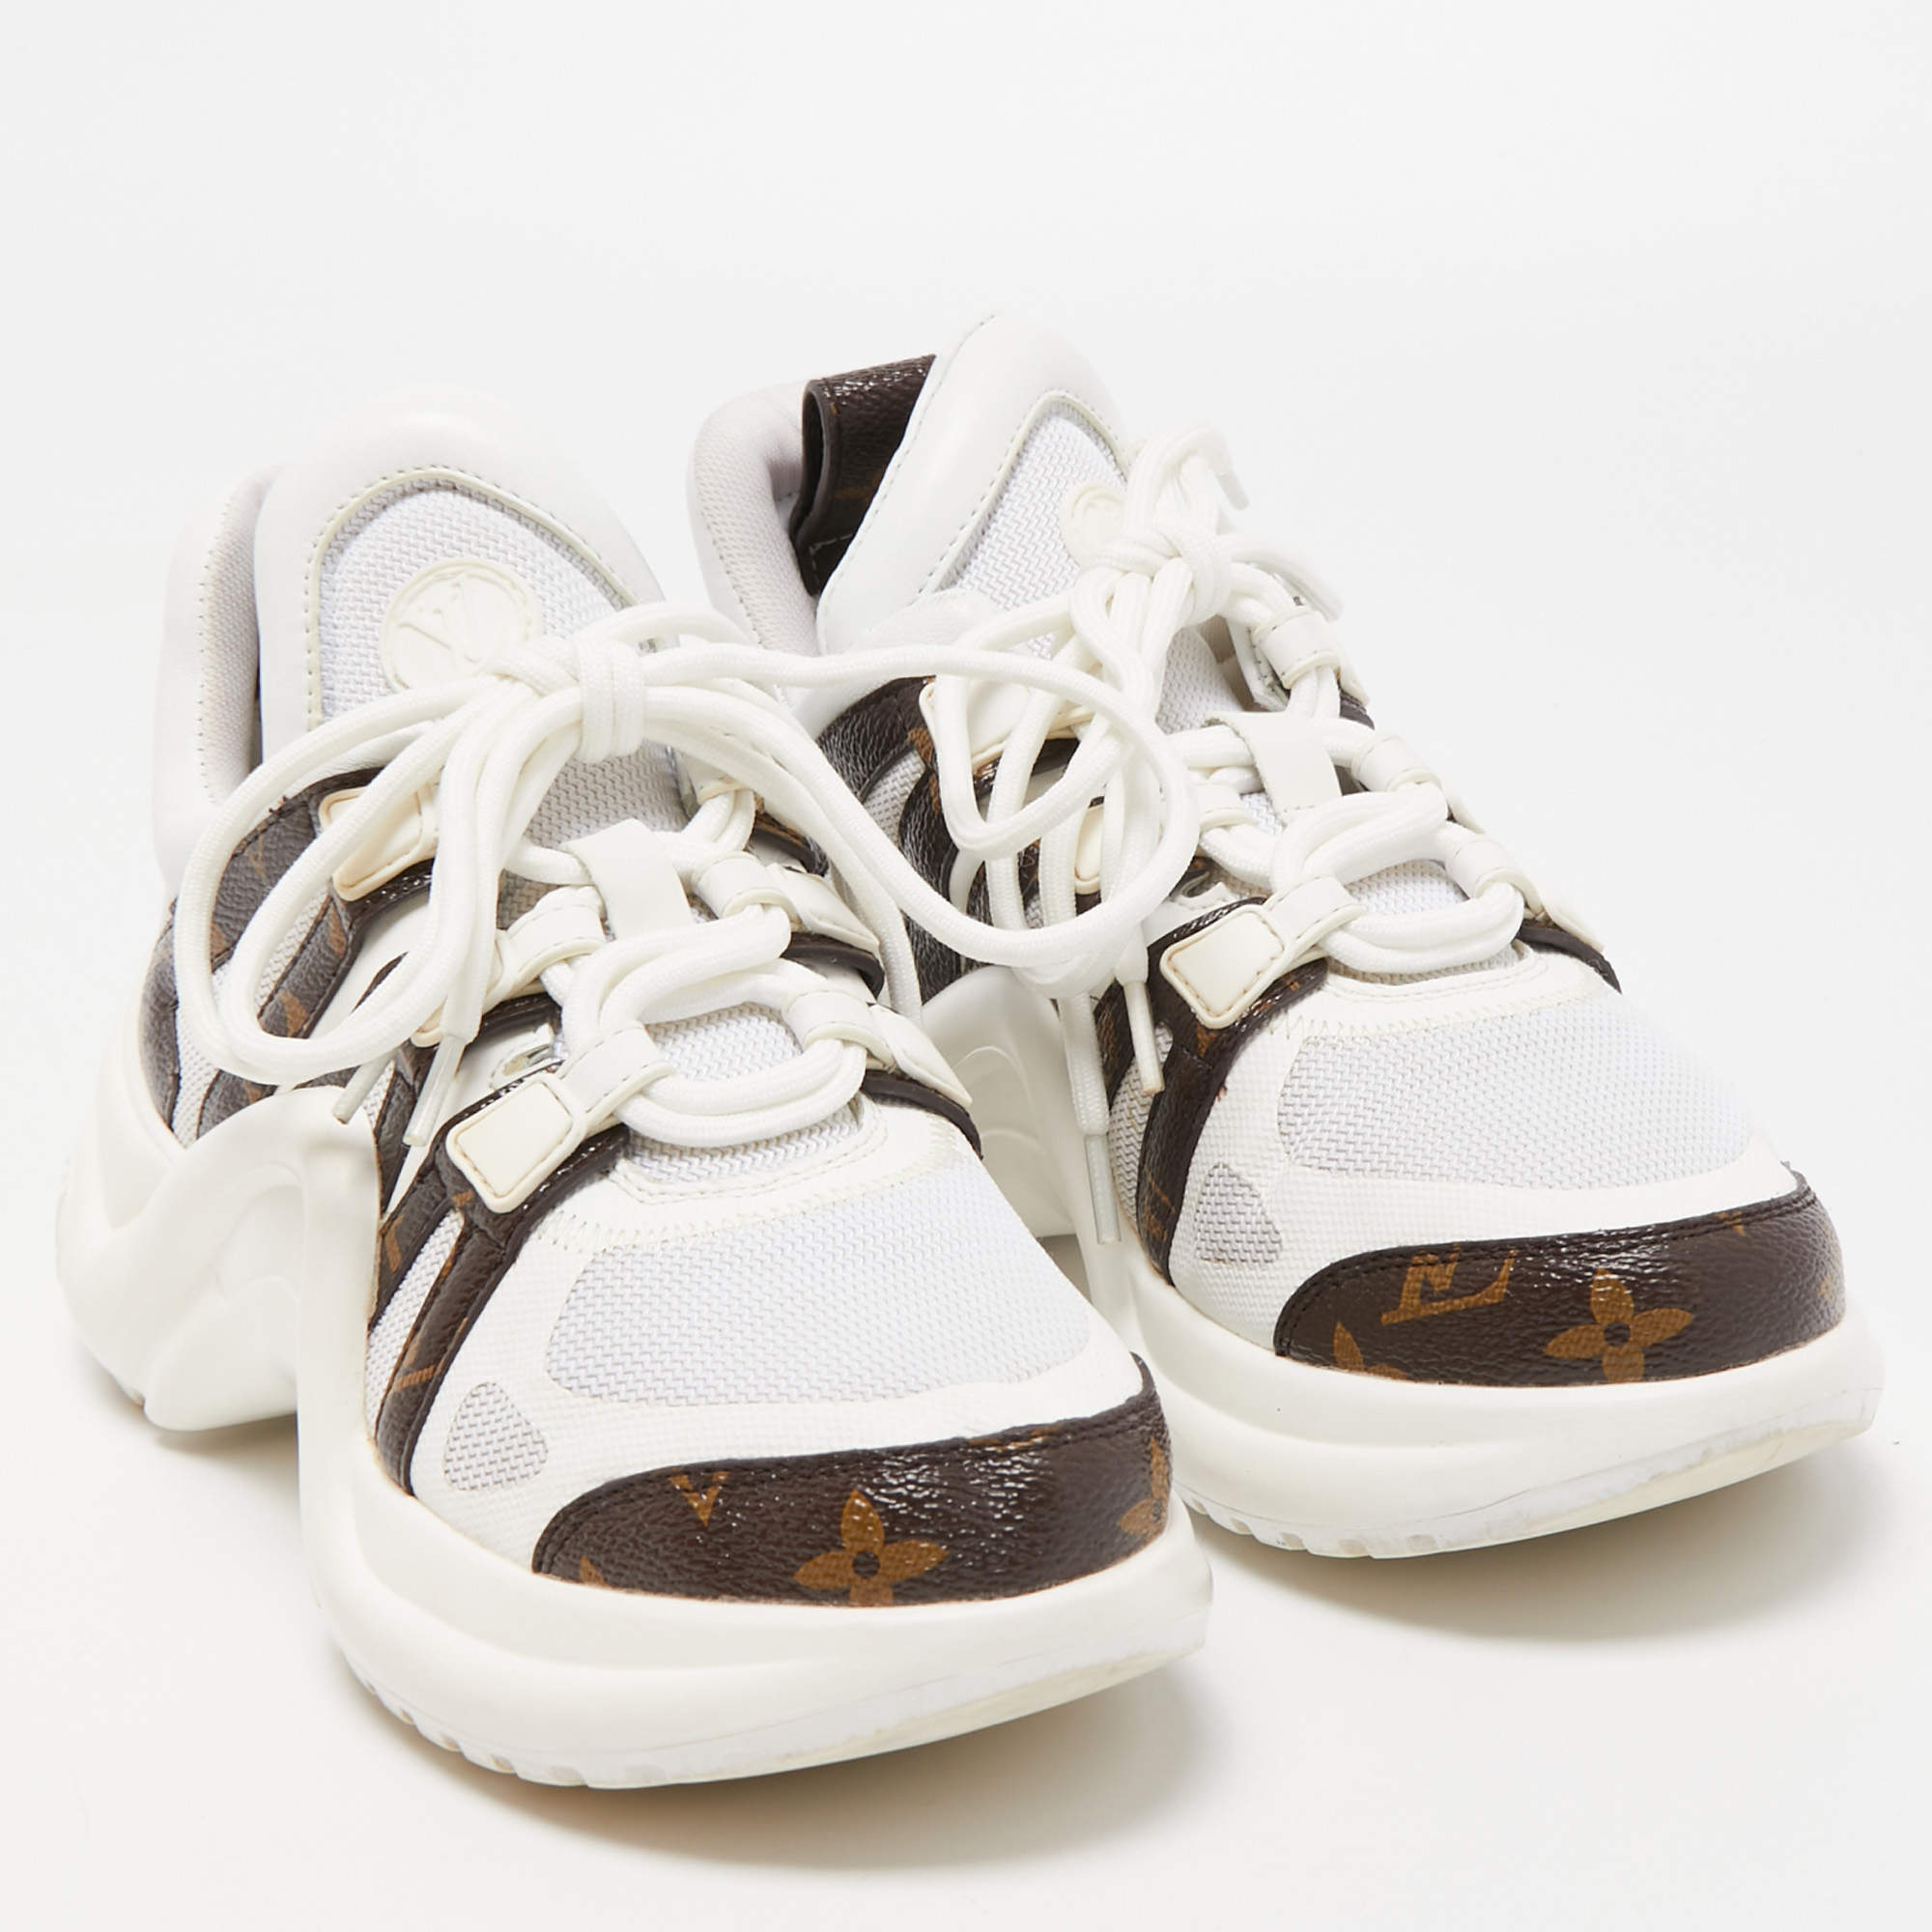 Louis Vuitton White/Gold Nylon and Foil Leather Arclight Low Top